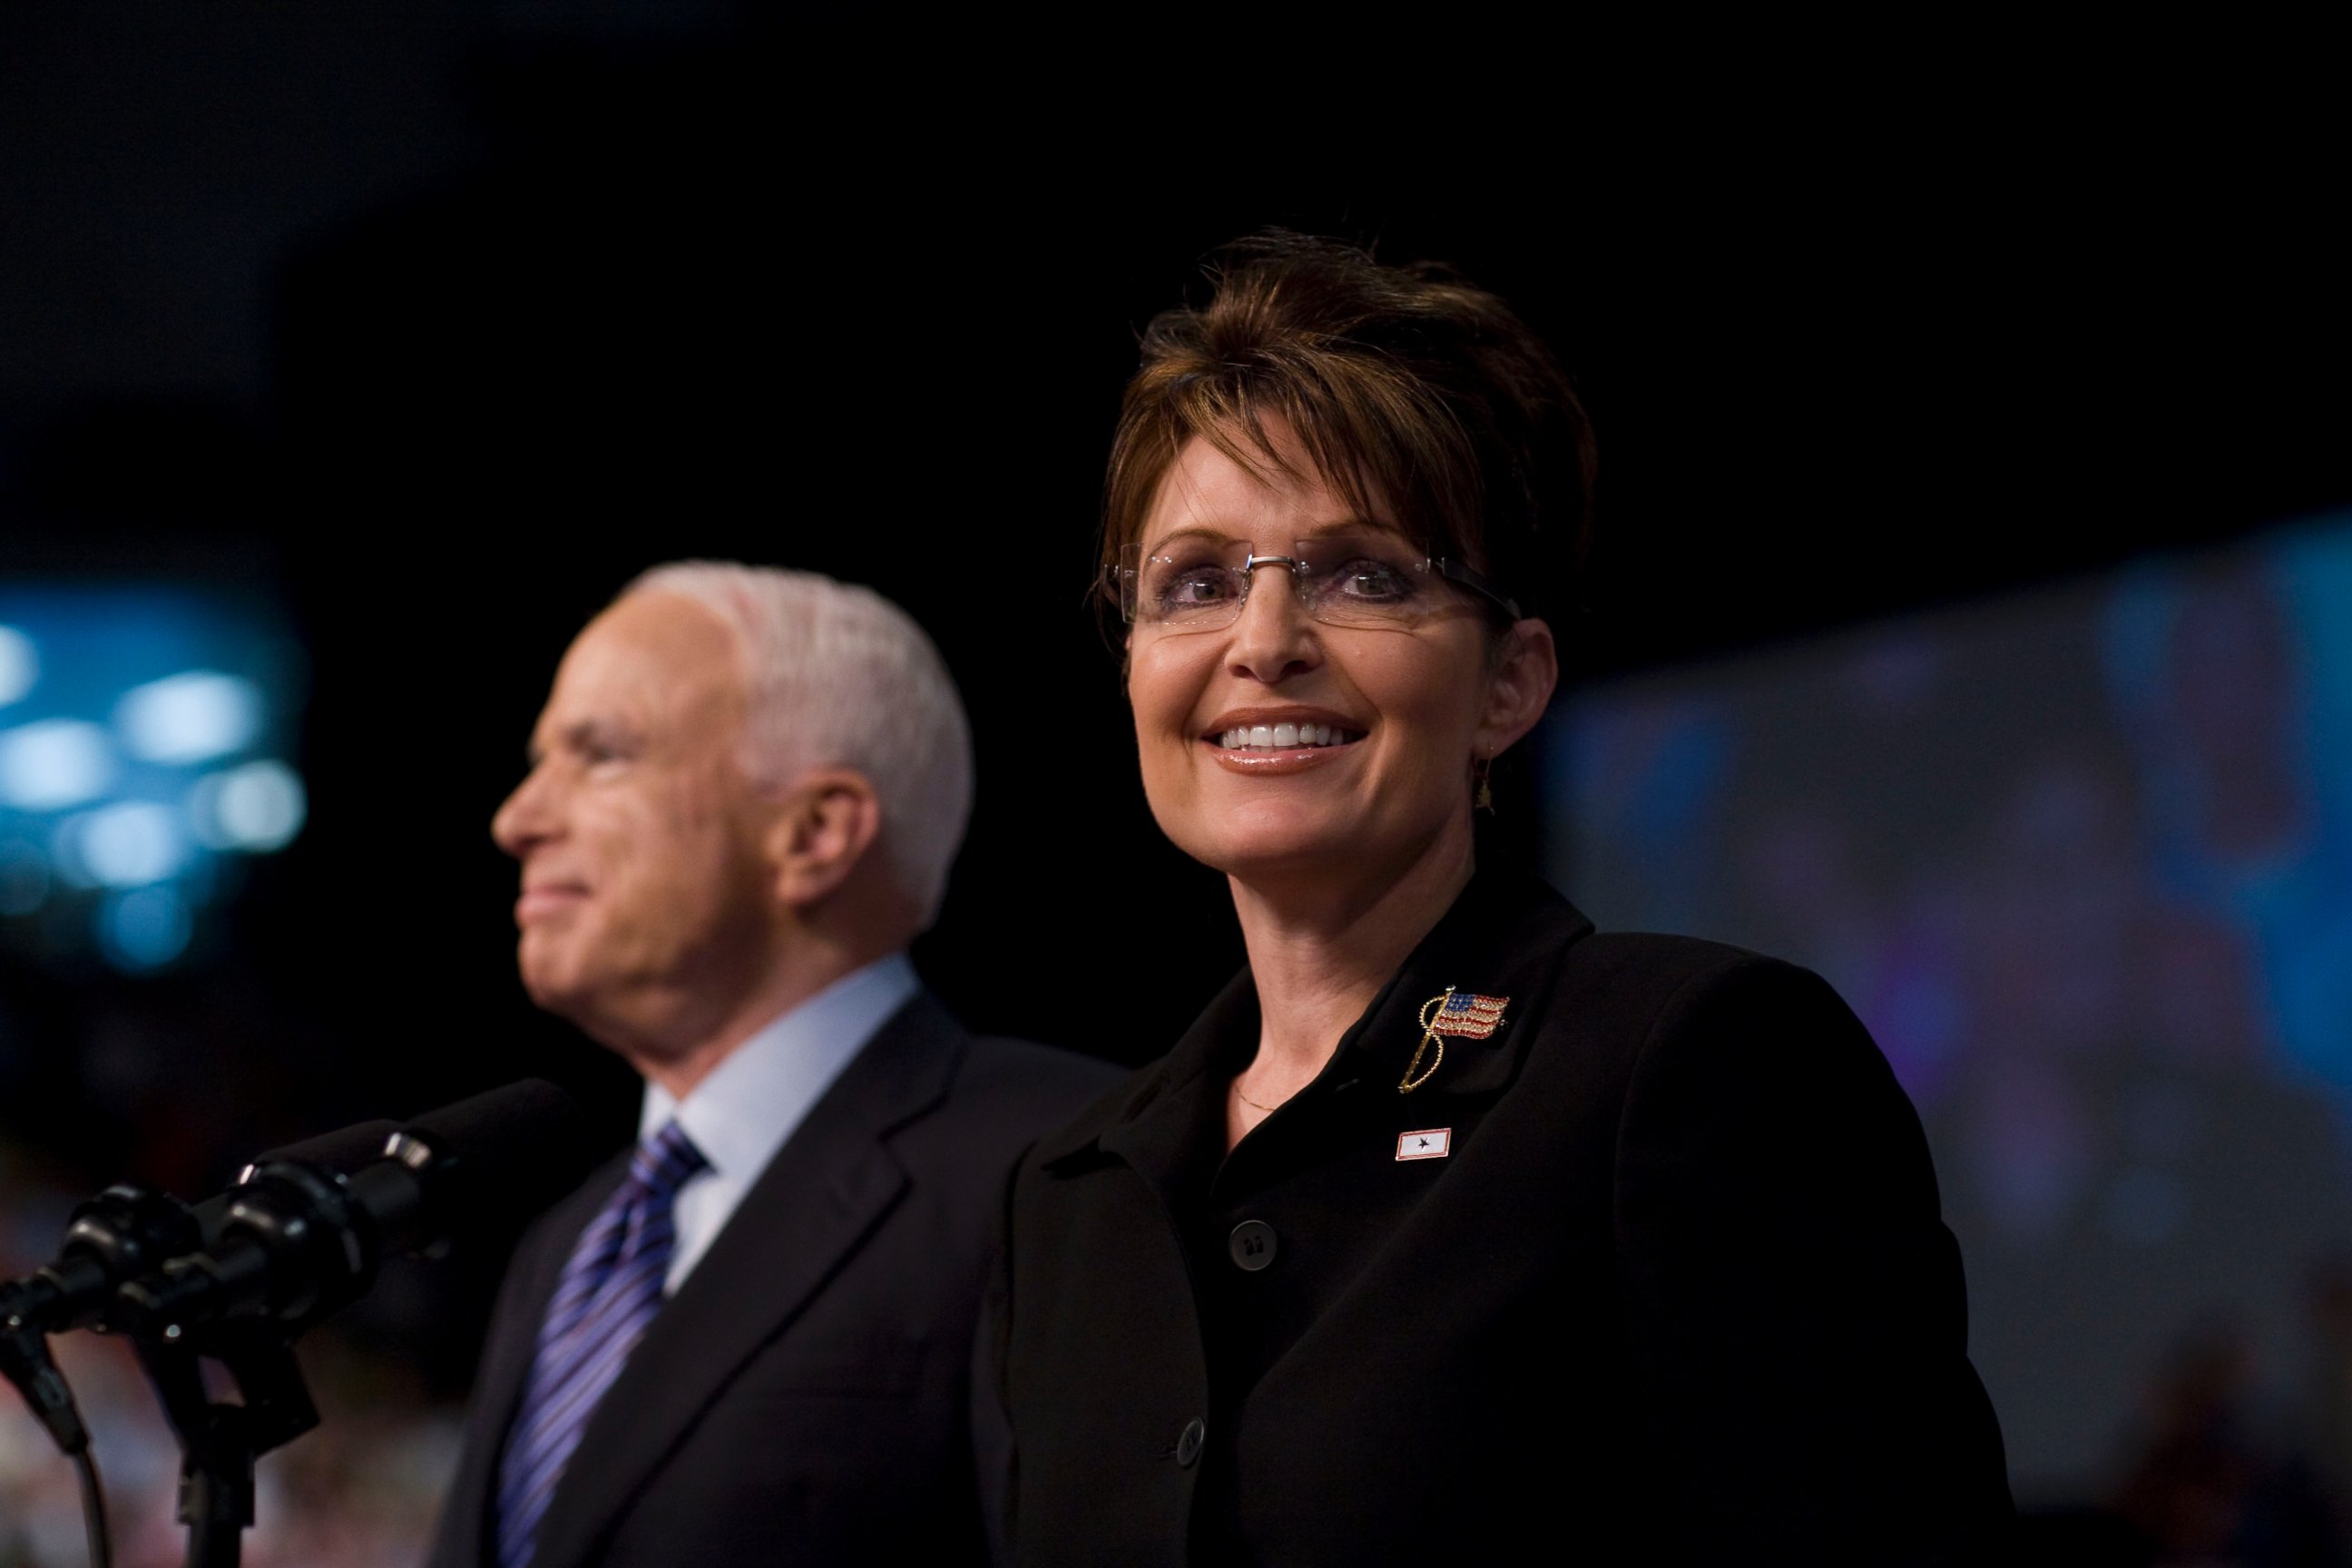 PHOTO: John McCain is pictured with Sarah Palin on Aug. 29, 2008 at a rally in Dayton, Ohio. McCain named Palin as his vice presidential running mate at the rally.